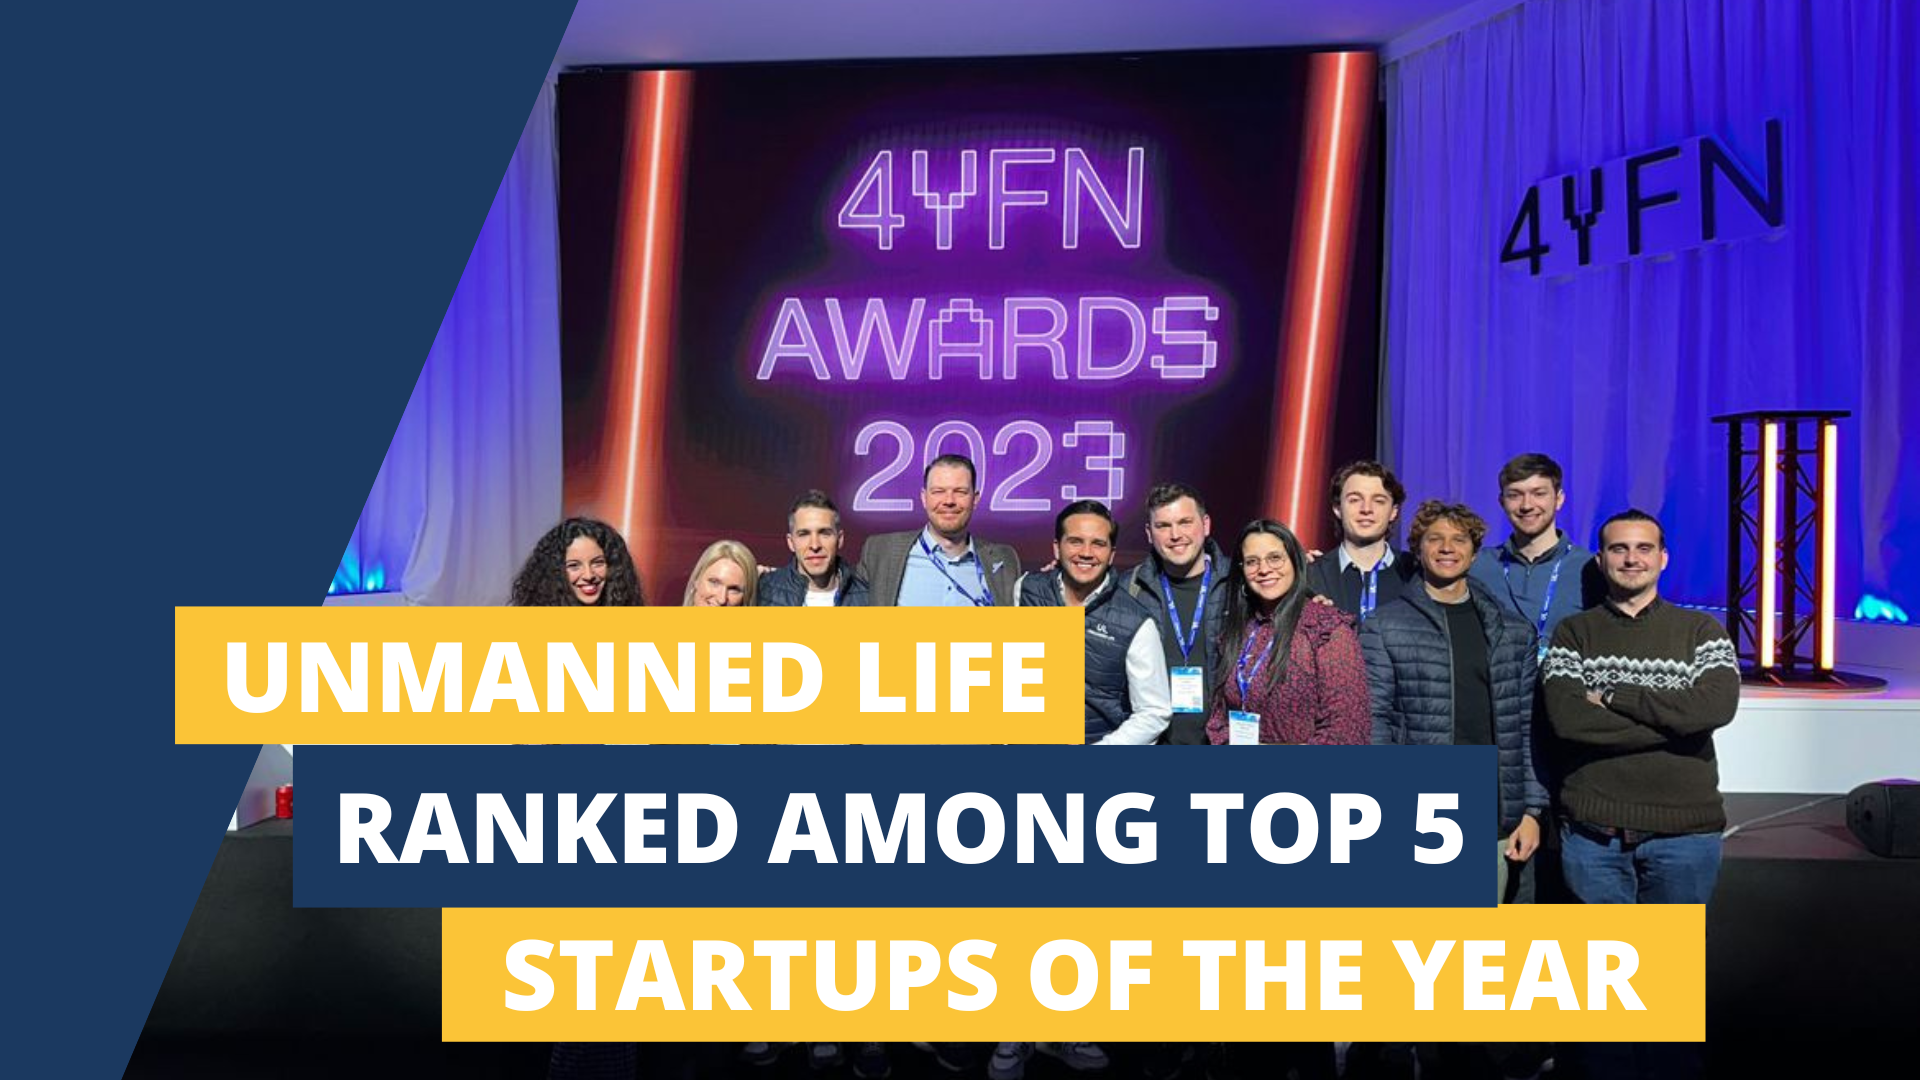 Unmanned Life among TOP 5 Startups of the Year